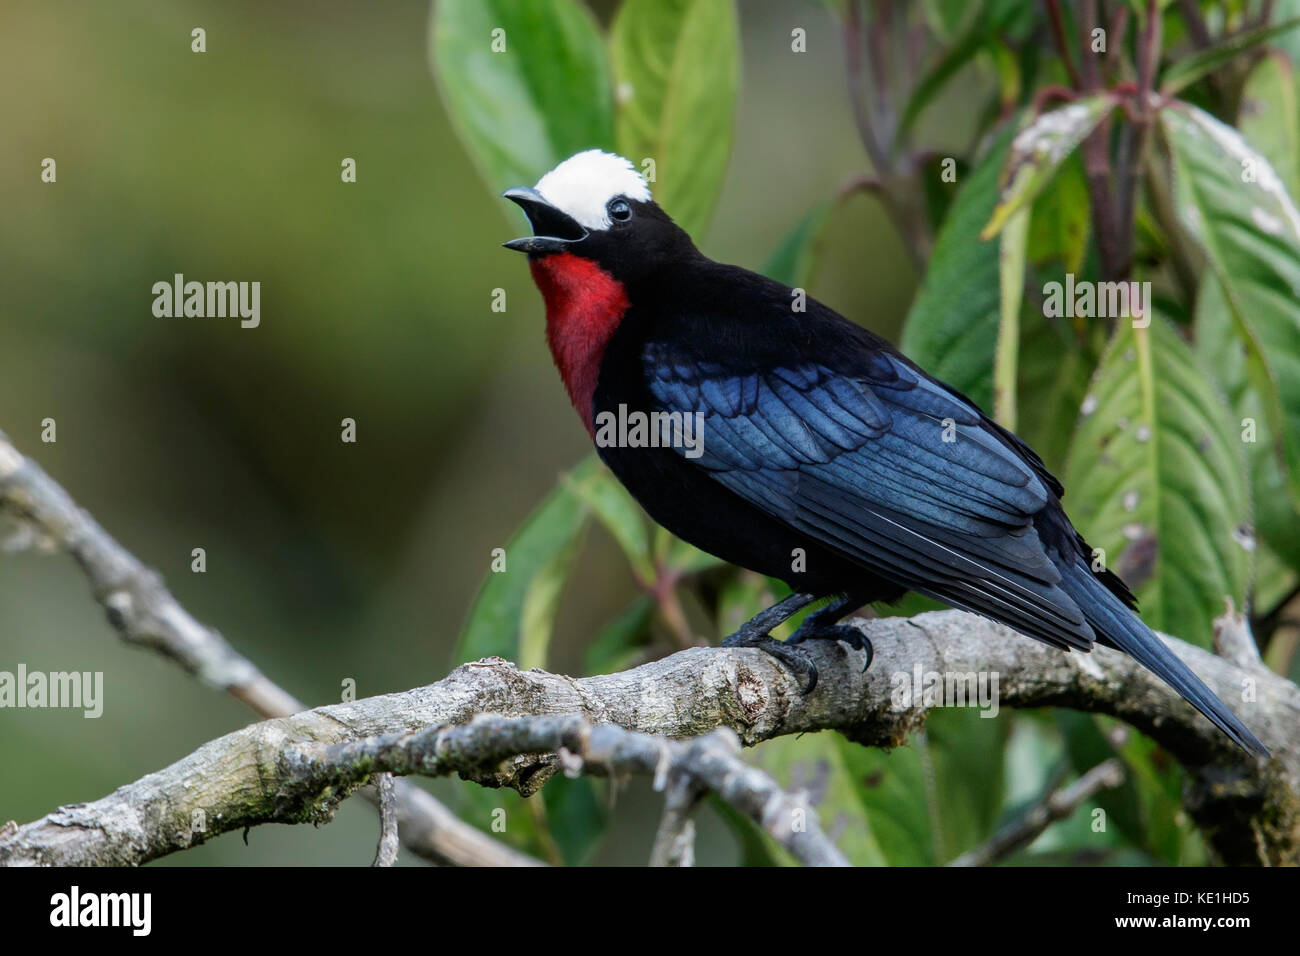 White-capped Tanager (Sericossypha albocristata) perched on a branch in the Andes Mountains of Colombia. Stock Photo